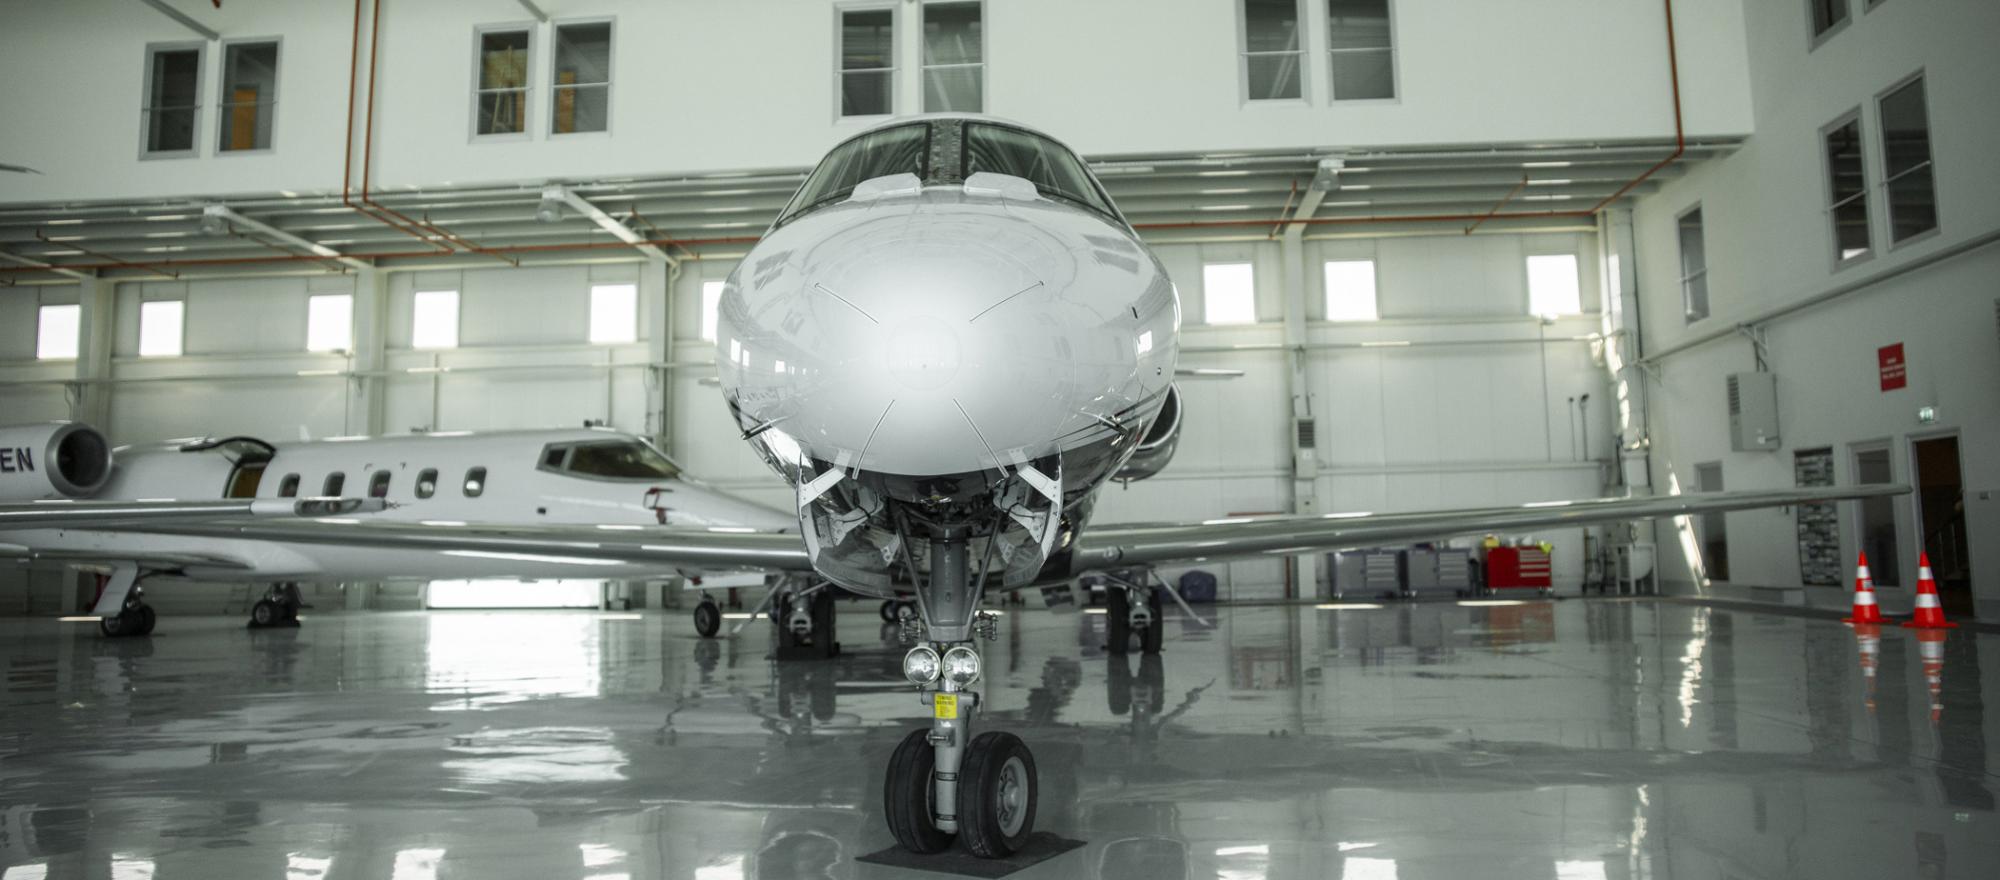 Even though your jet may be hibernating, don’t try to skimp on costs by negle